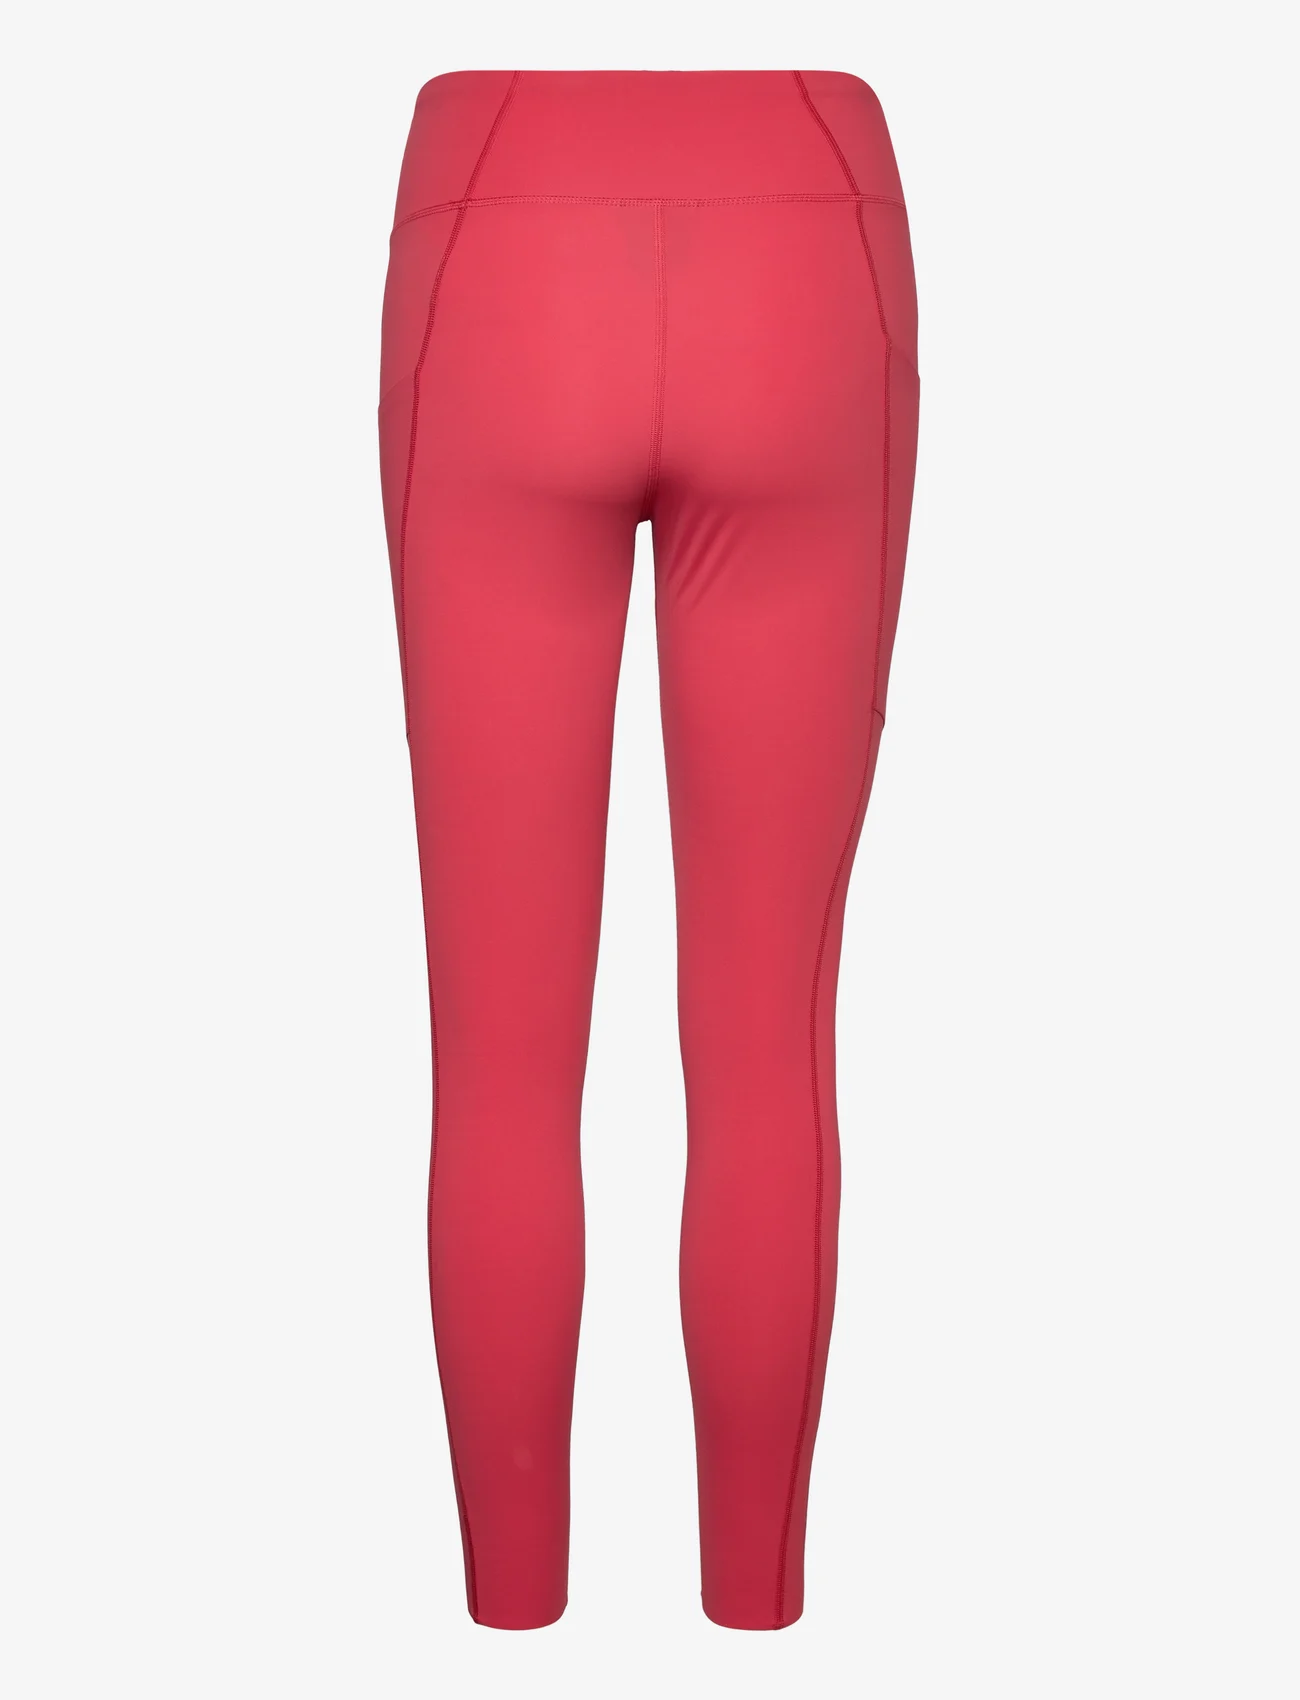 Peak Performance - W Power Tights-SOFTER RED - träningstights - softer red - 1